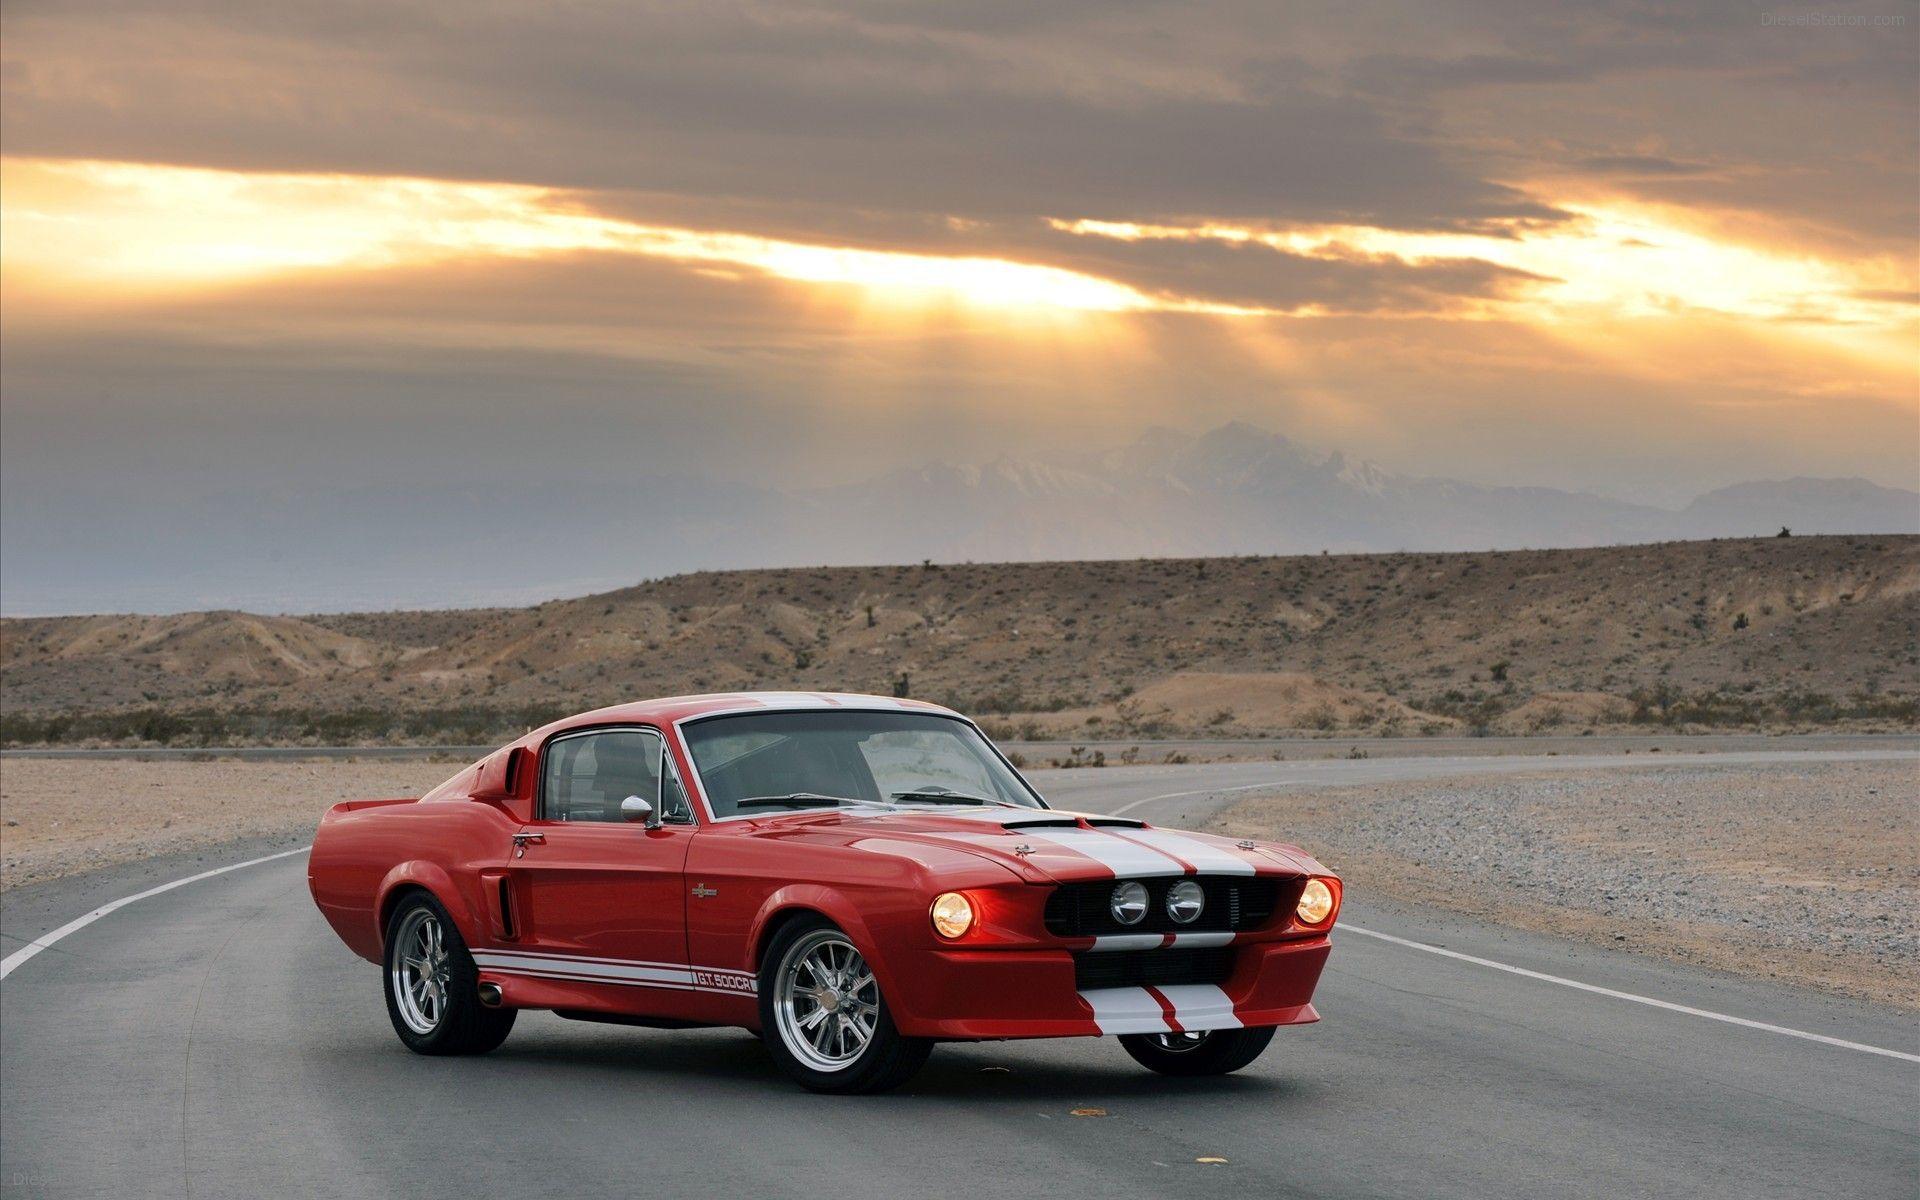 Mustang Shelby fastback. Cars mustang, Cars